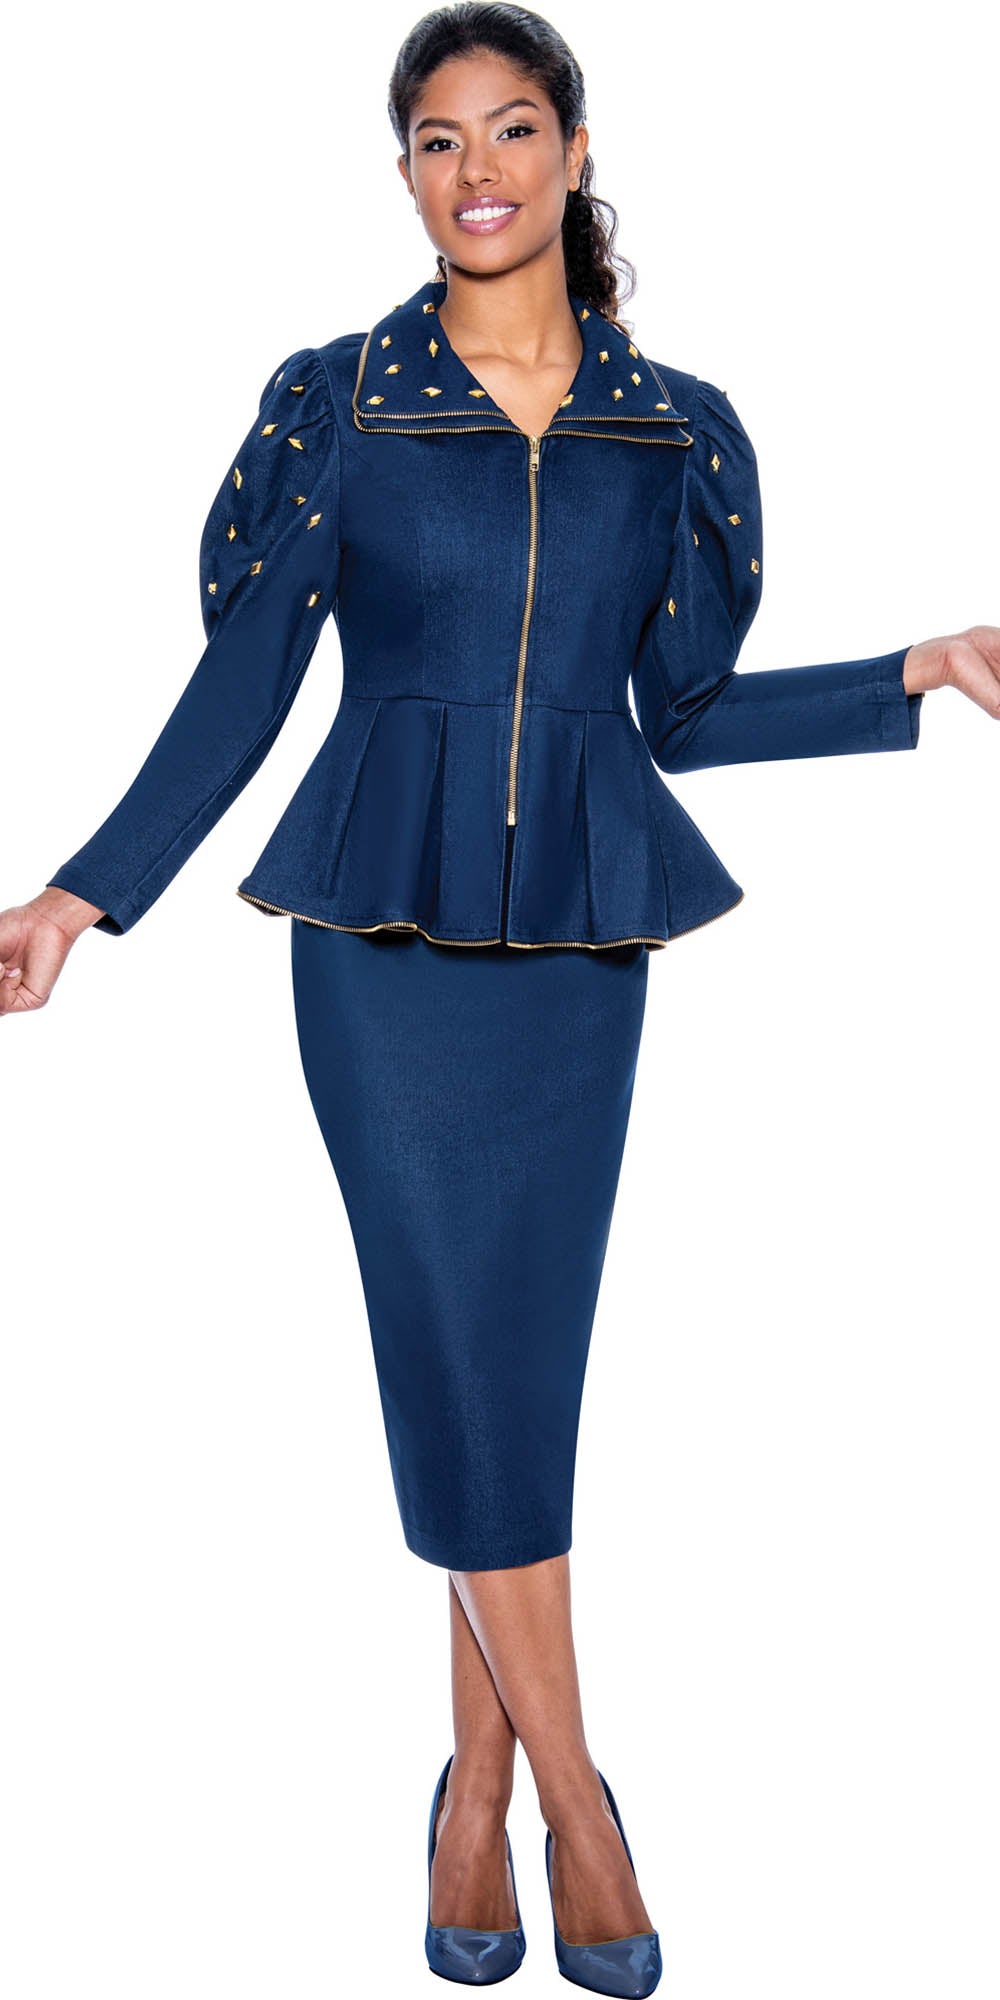 Devine Sport DS63482 - Soft Stretch Denim Skirt Suit with Peplum Top and Studs